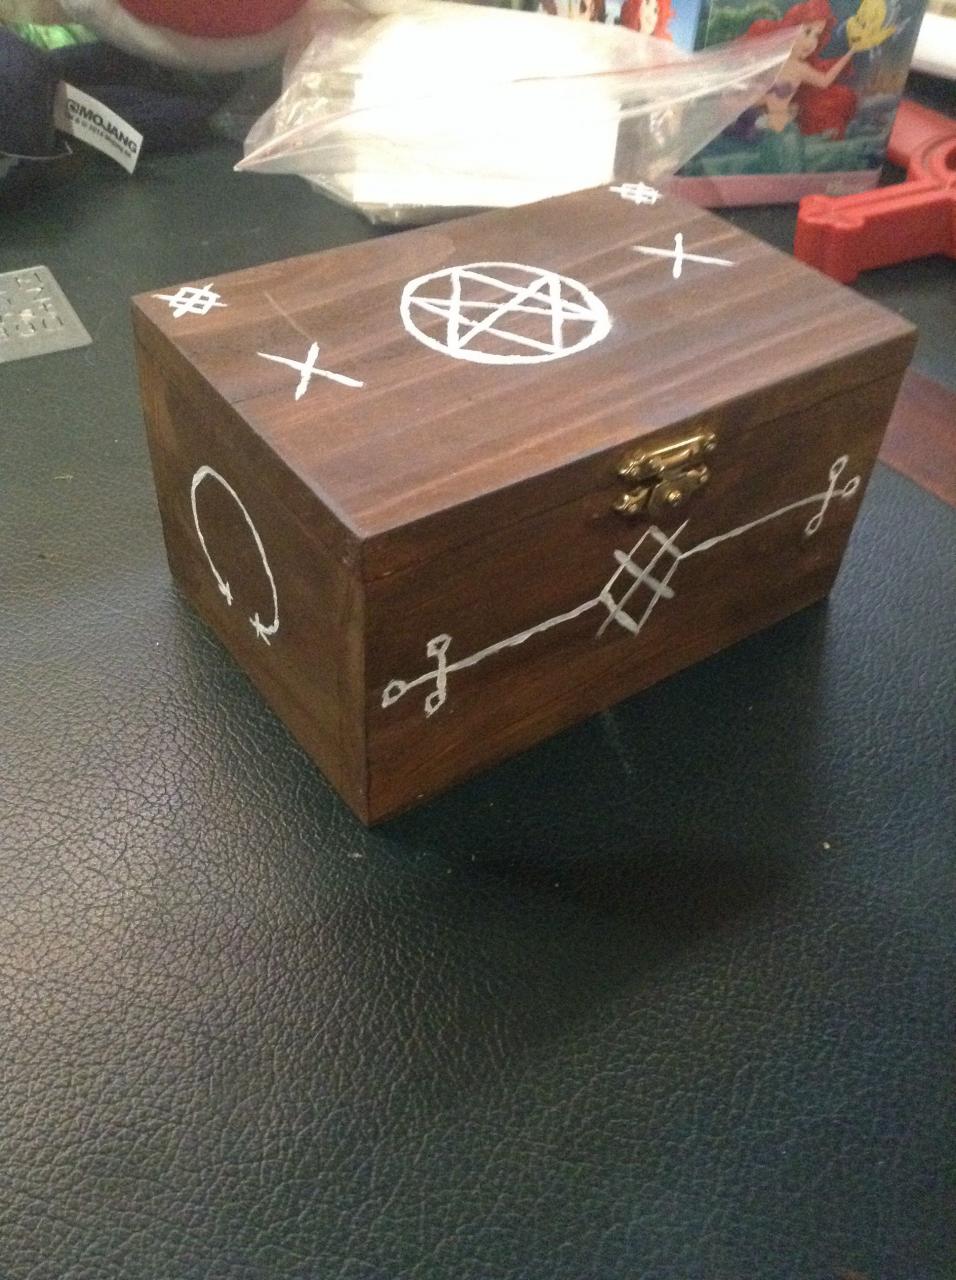 My amazing supernaturalinspired cursed object box Cursed objects